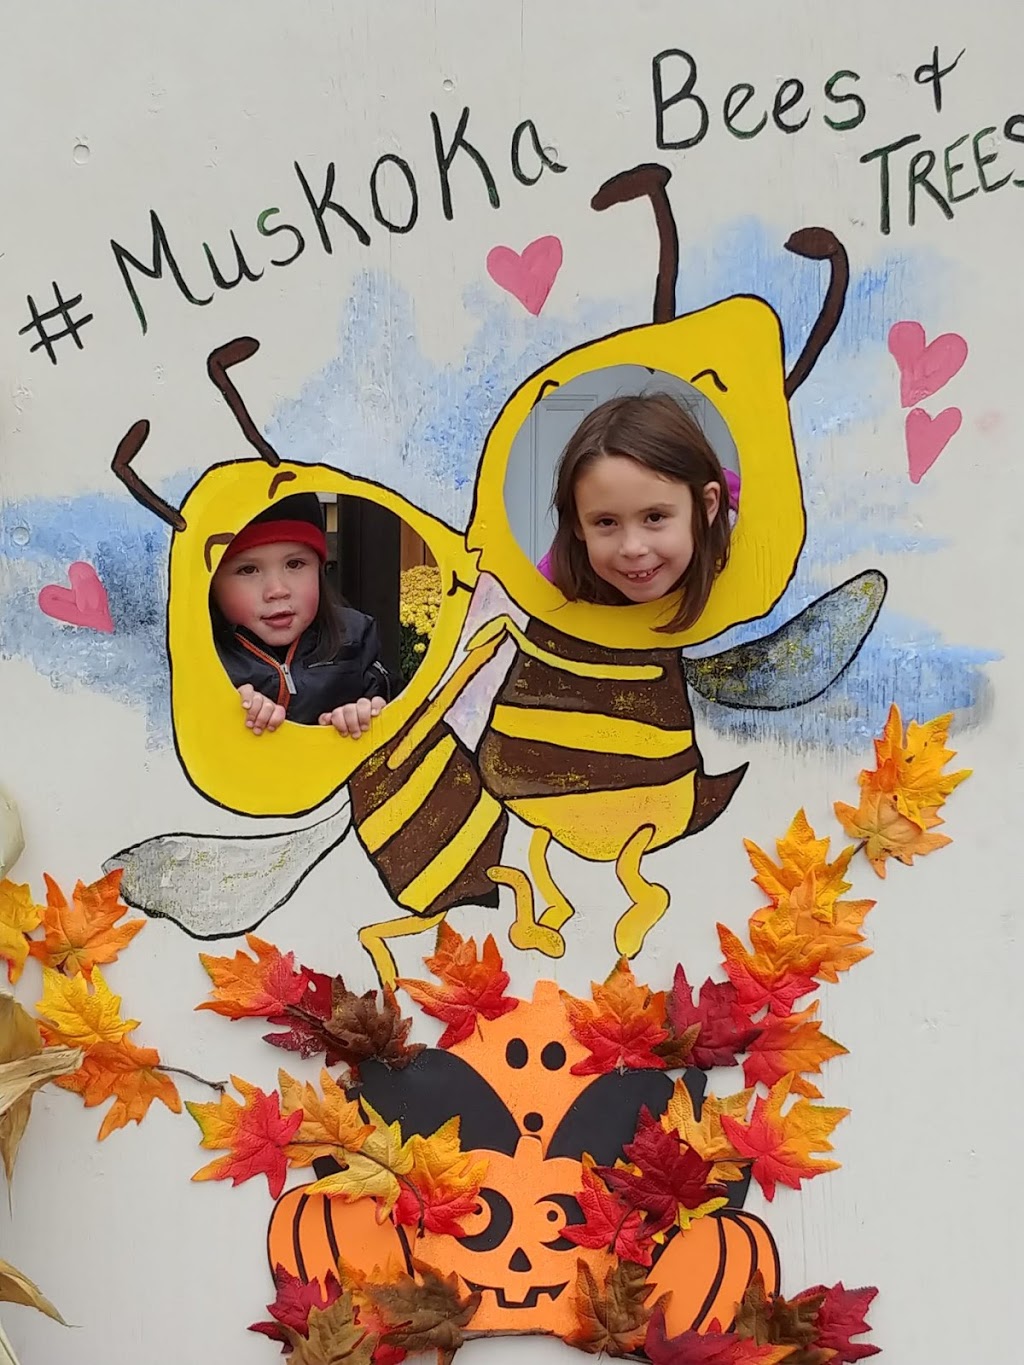 Muskoka Bees And Trees Cafe | Victoria St W, Rosseau, ON P0C 1J0, Canada | Phone: (249) 222-0537